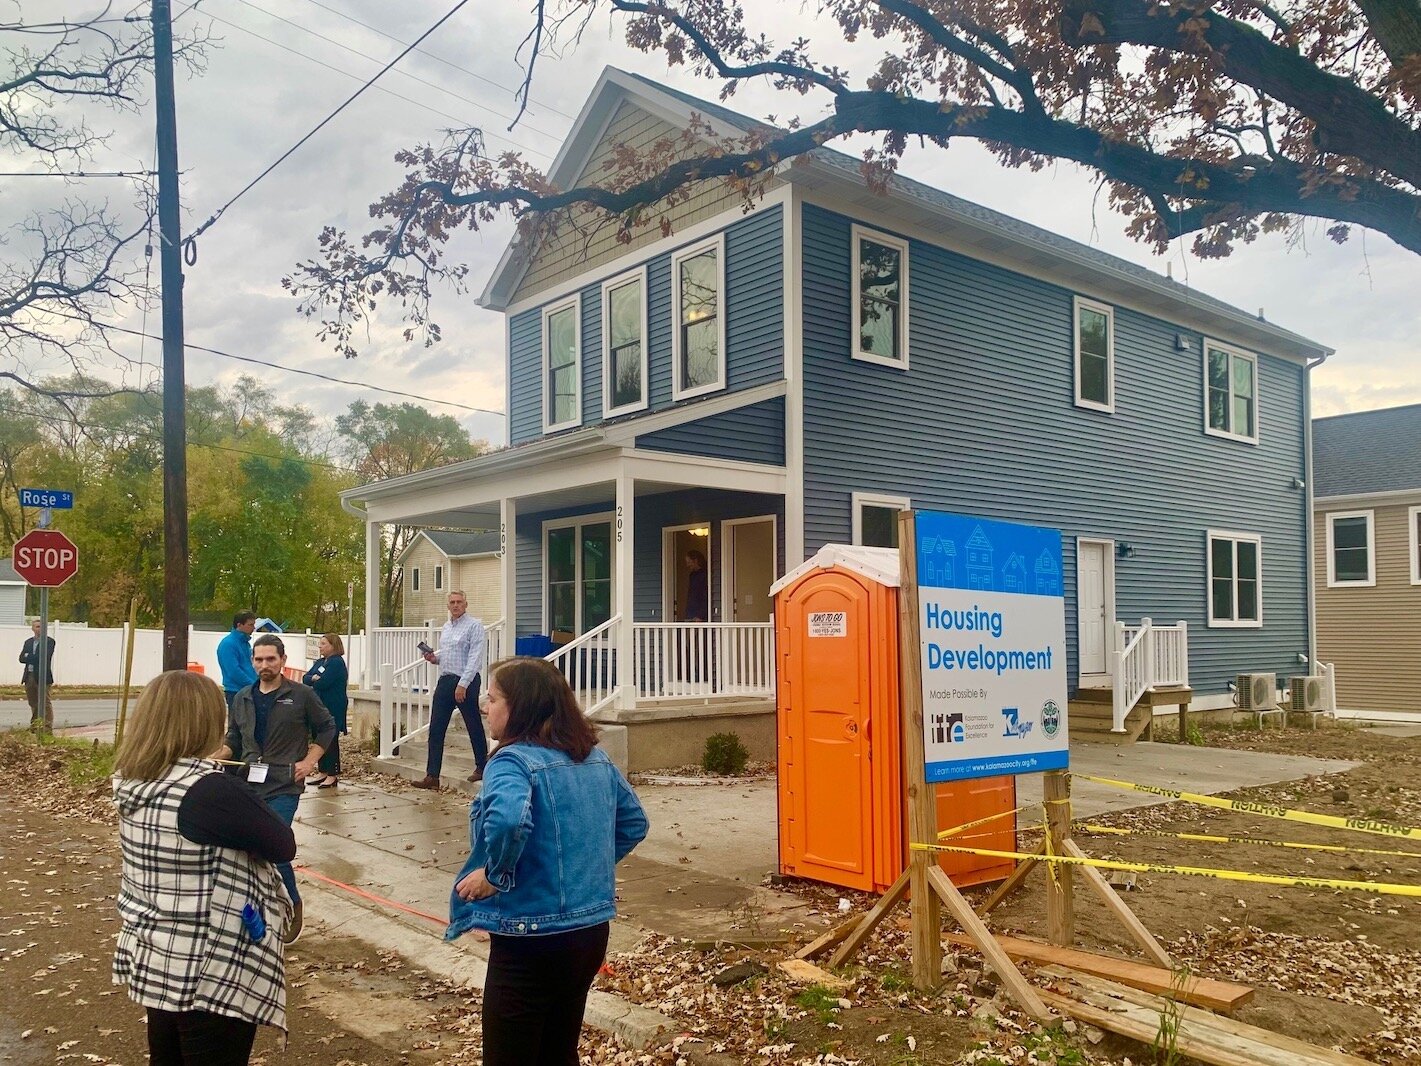 Officials with the City Of Kalamazoo and its development partners hosted an open house on Tuesday, Oct. 25, 2022, at a new housing duplex at 203–205 Wall Street in Kalamazoo’s Vine Neighborhood. (photo by Al Jones)